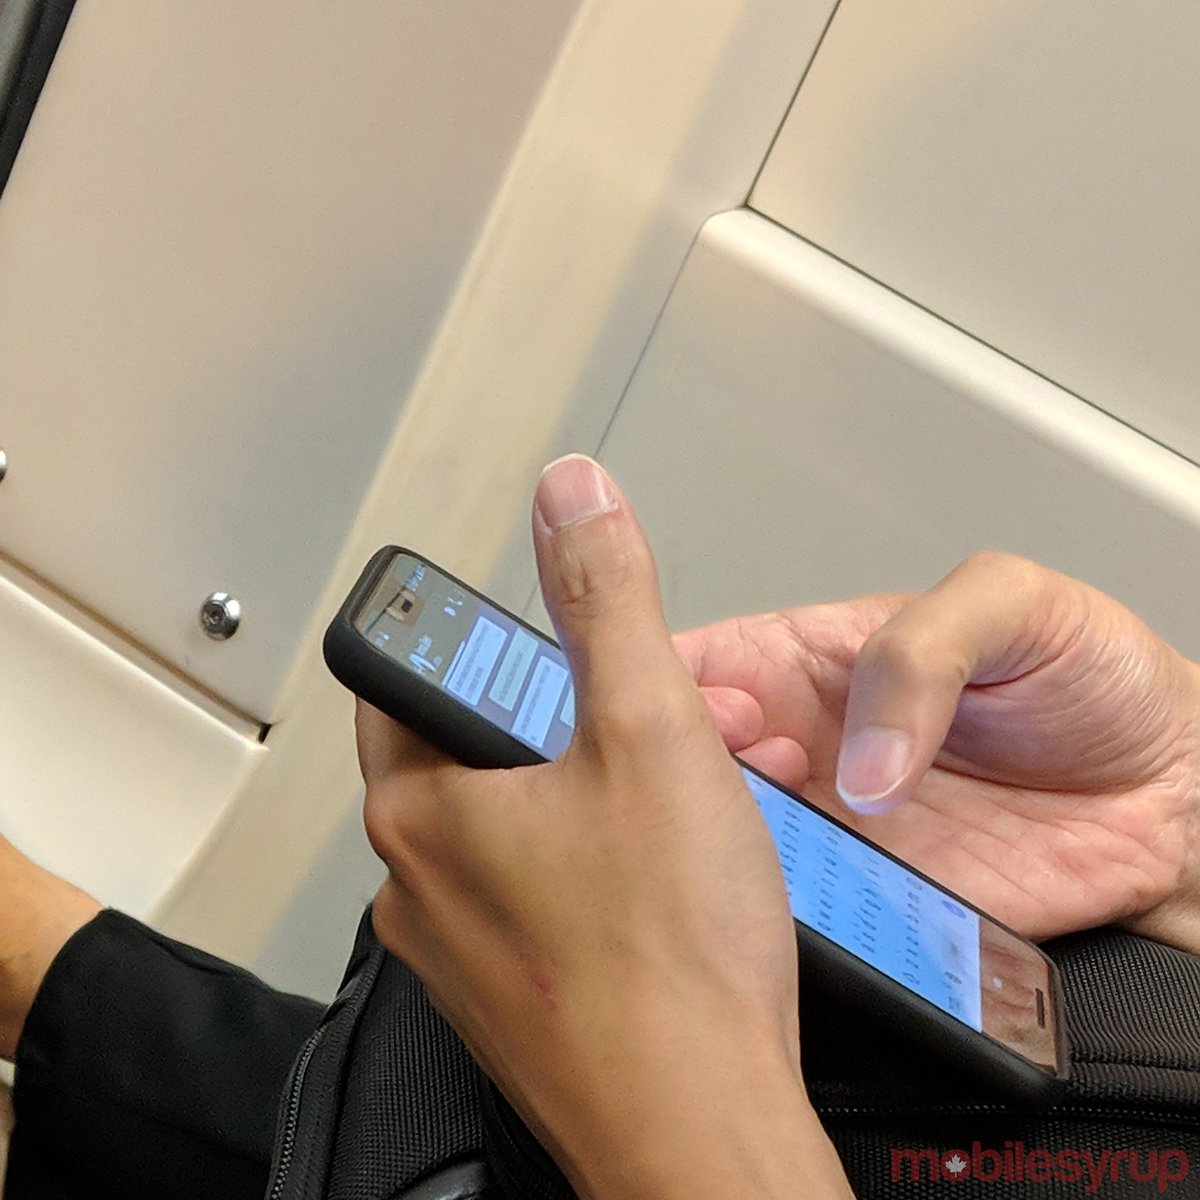 Pixel 3 XL spotted on a streetcar